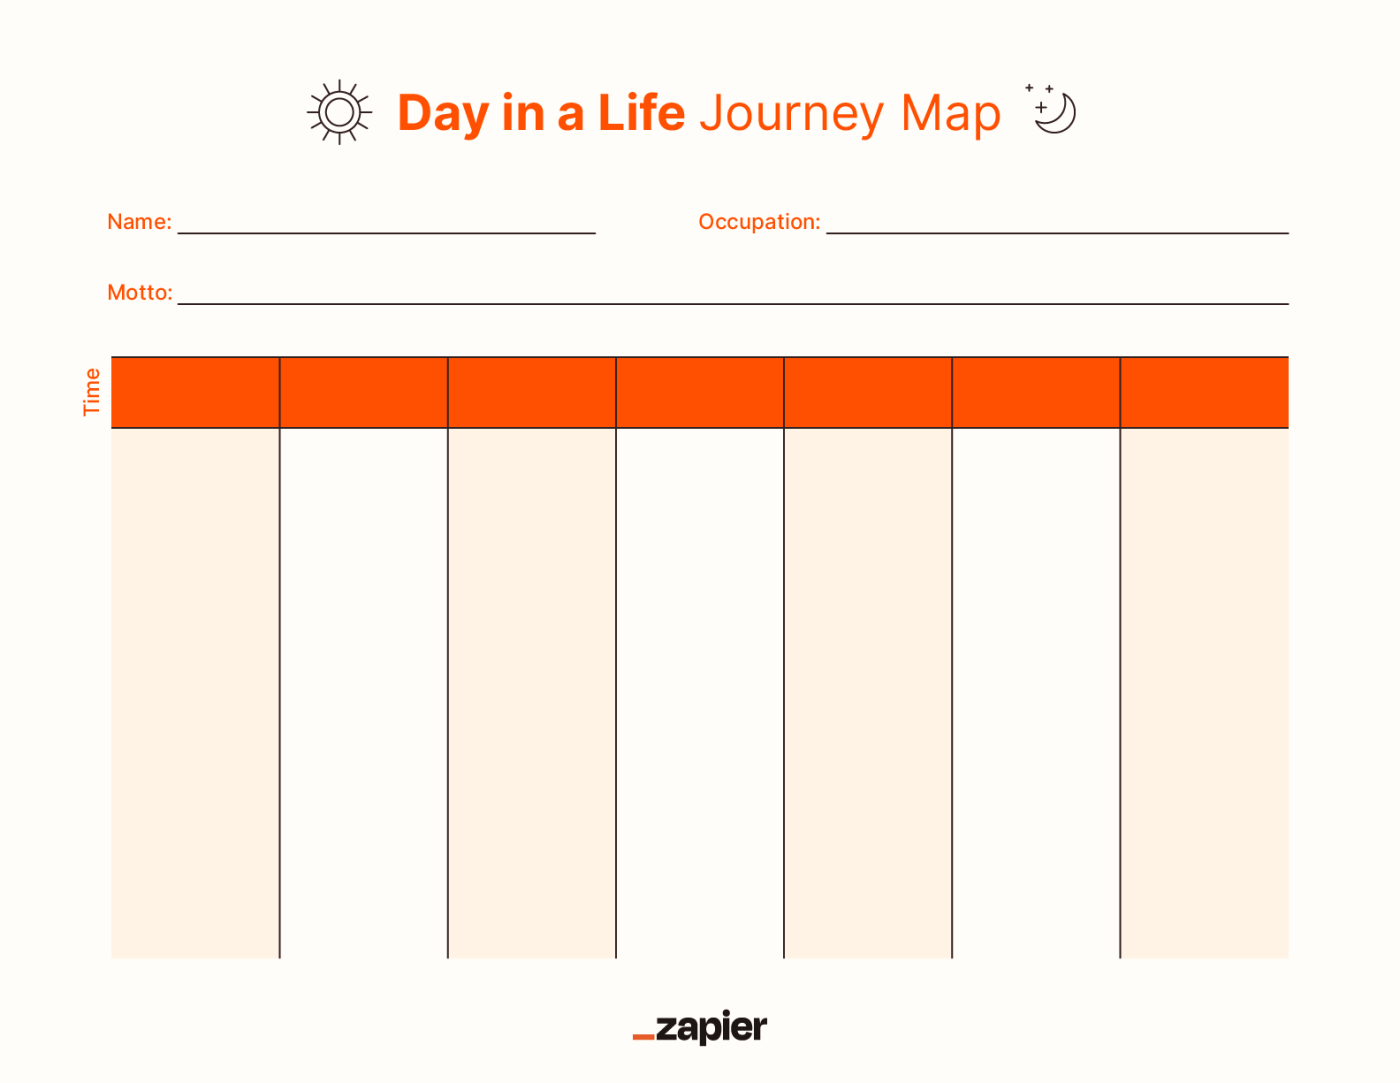 Template for a day in the life journey map.